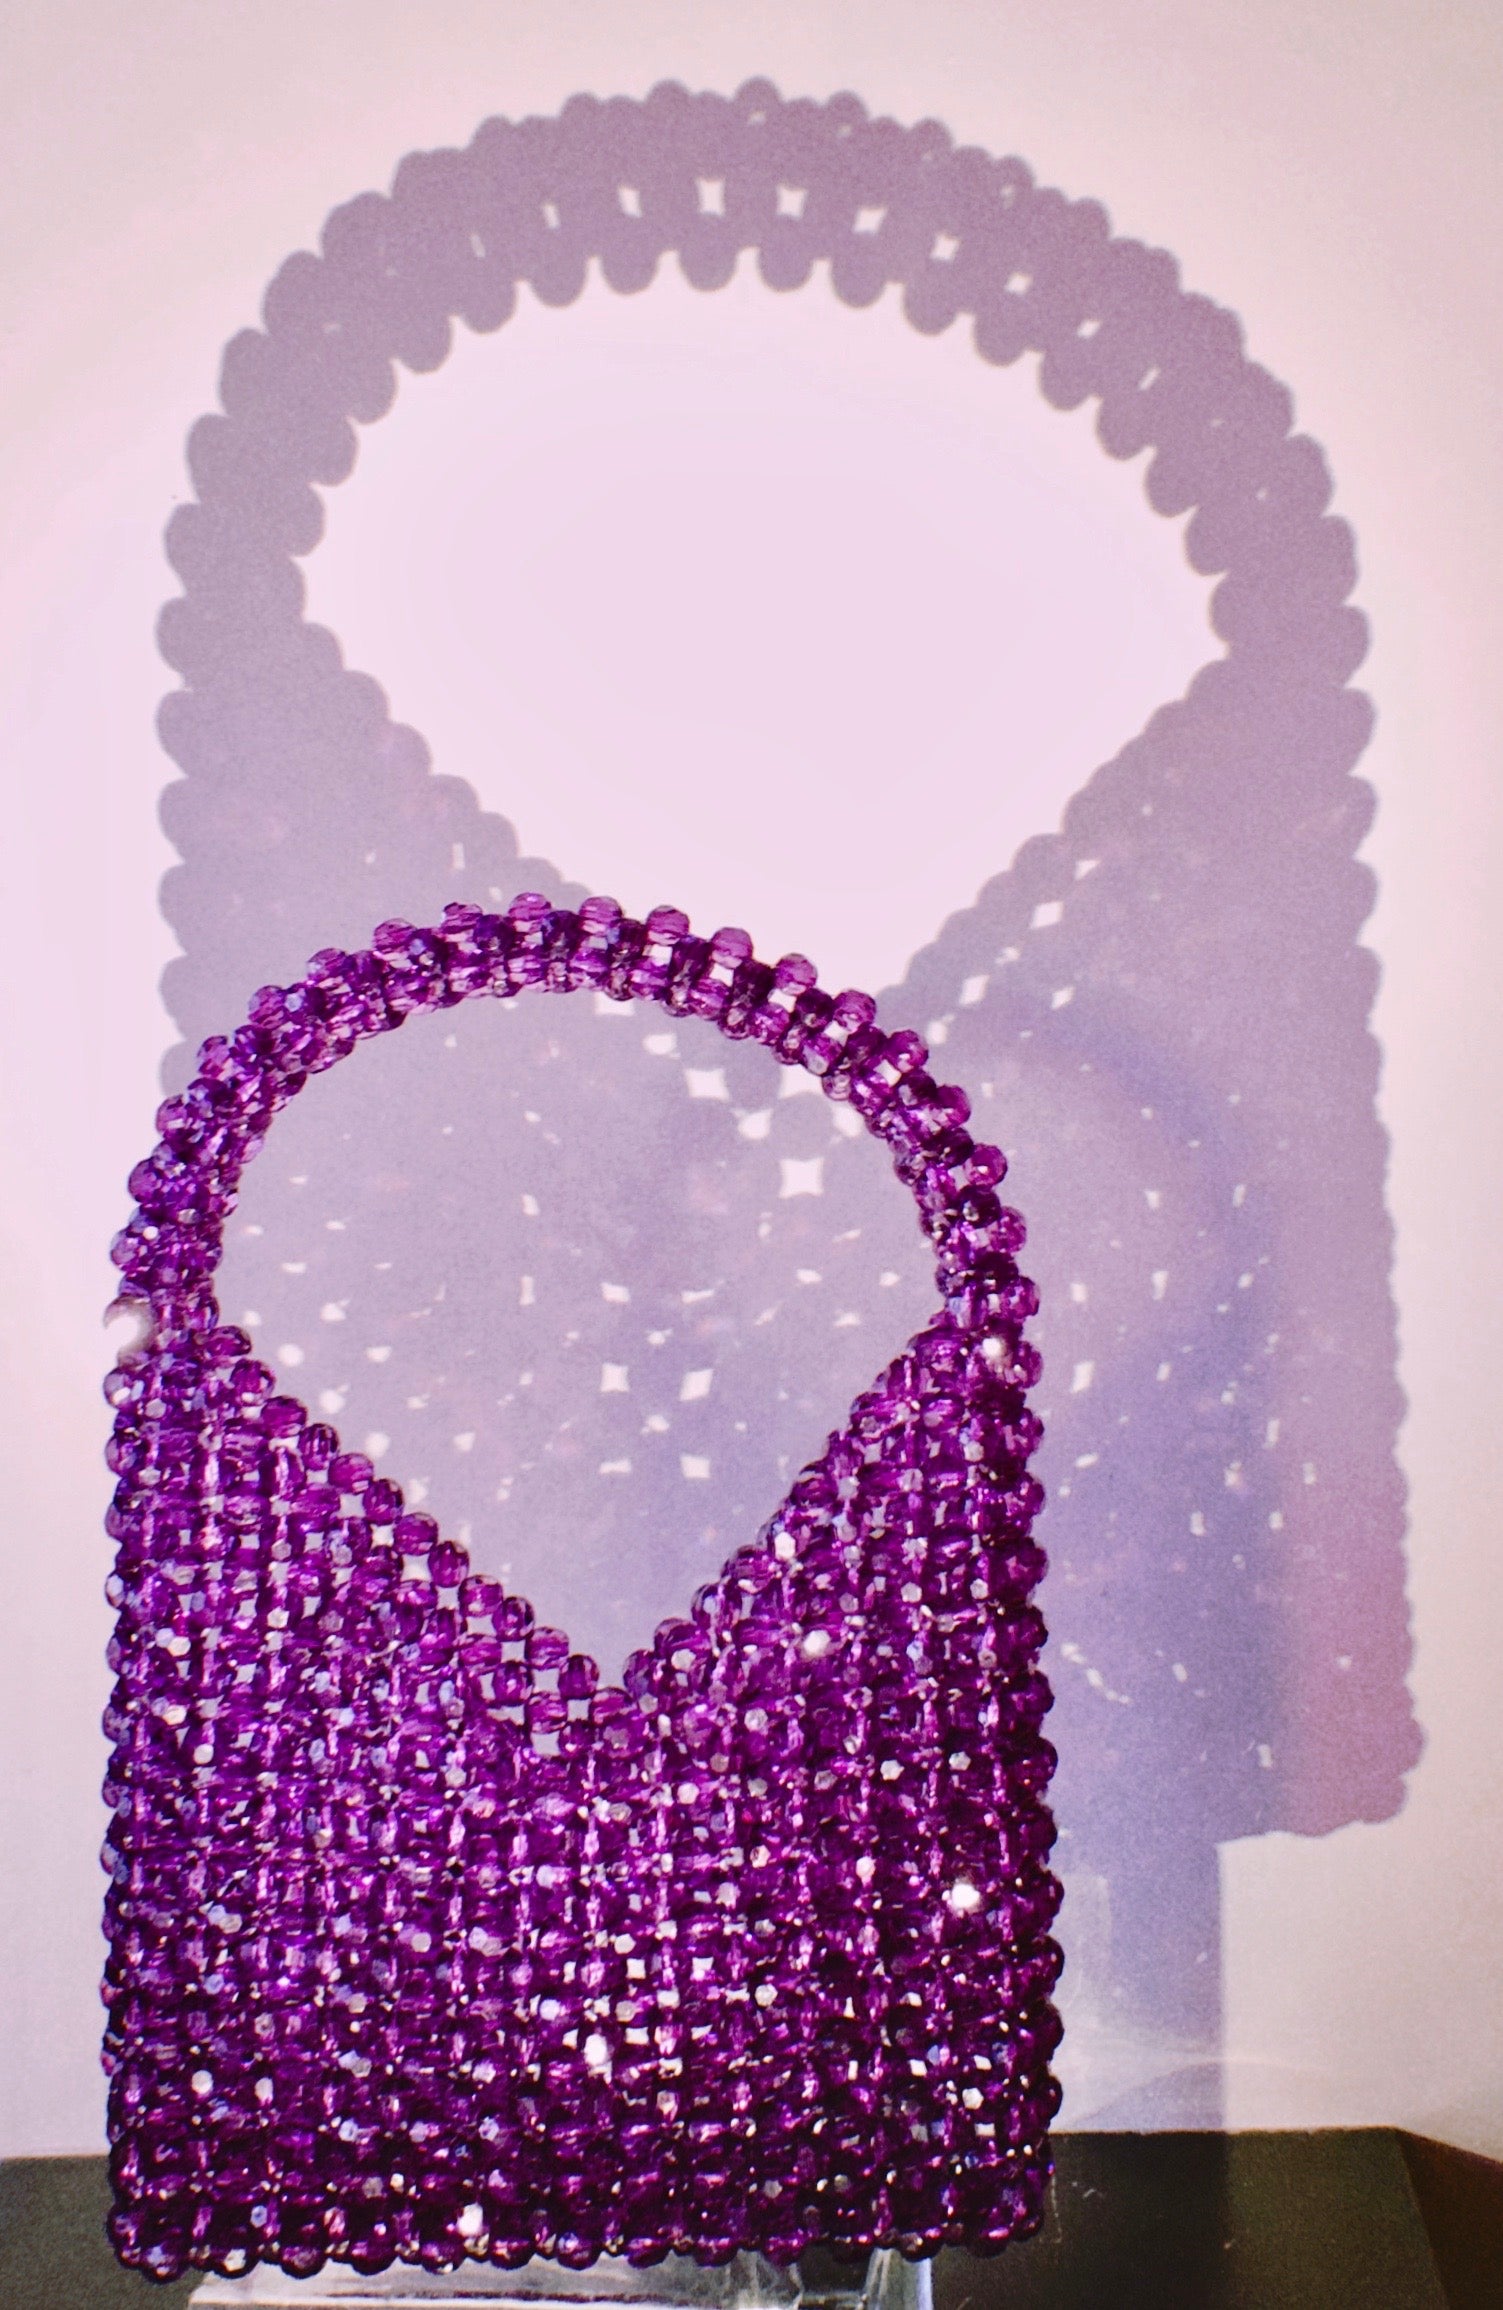 The Diana Beaded Bindle Bag by Veronique